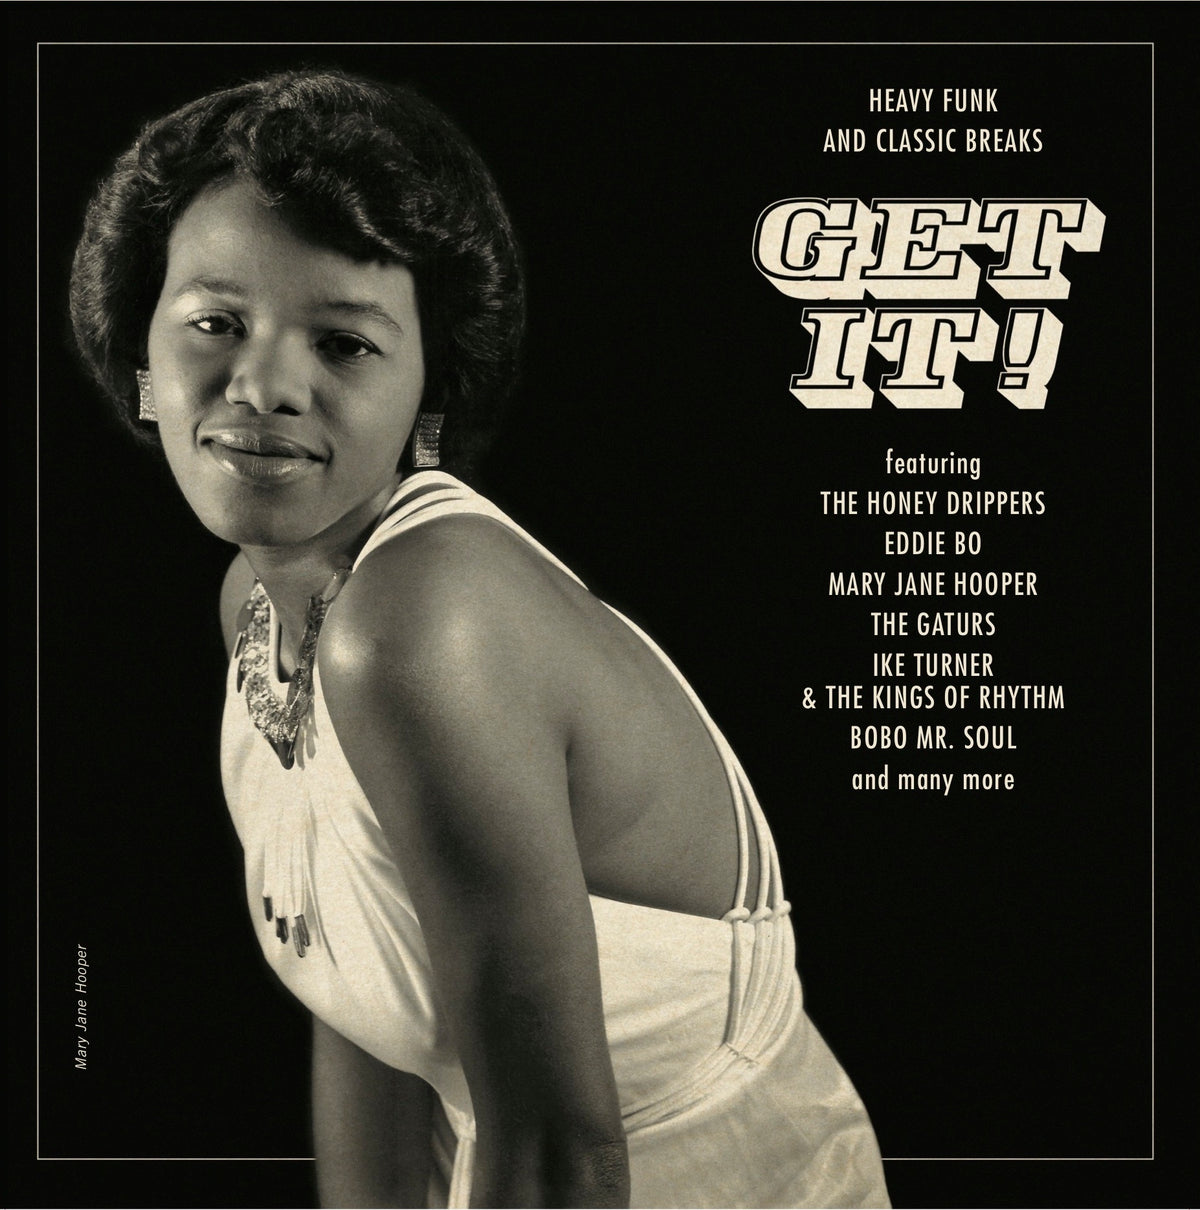 V/A - Get It! Heavy Funk And Classic Breaks 2LP